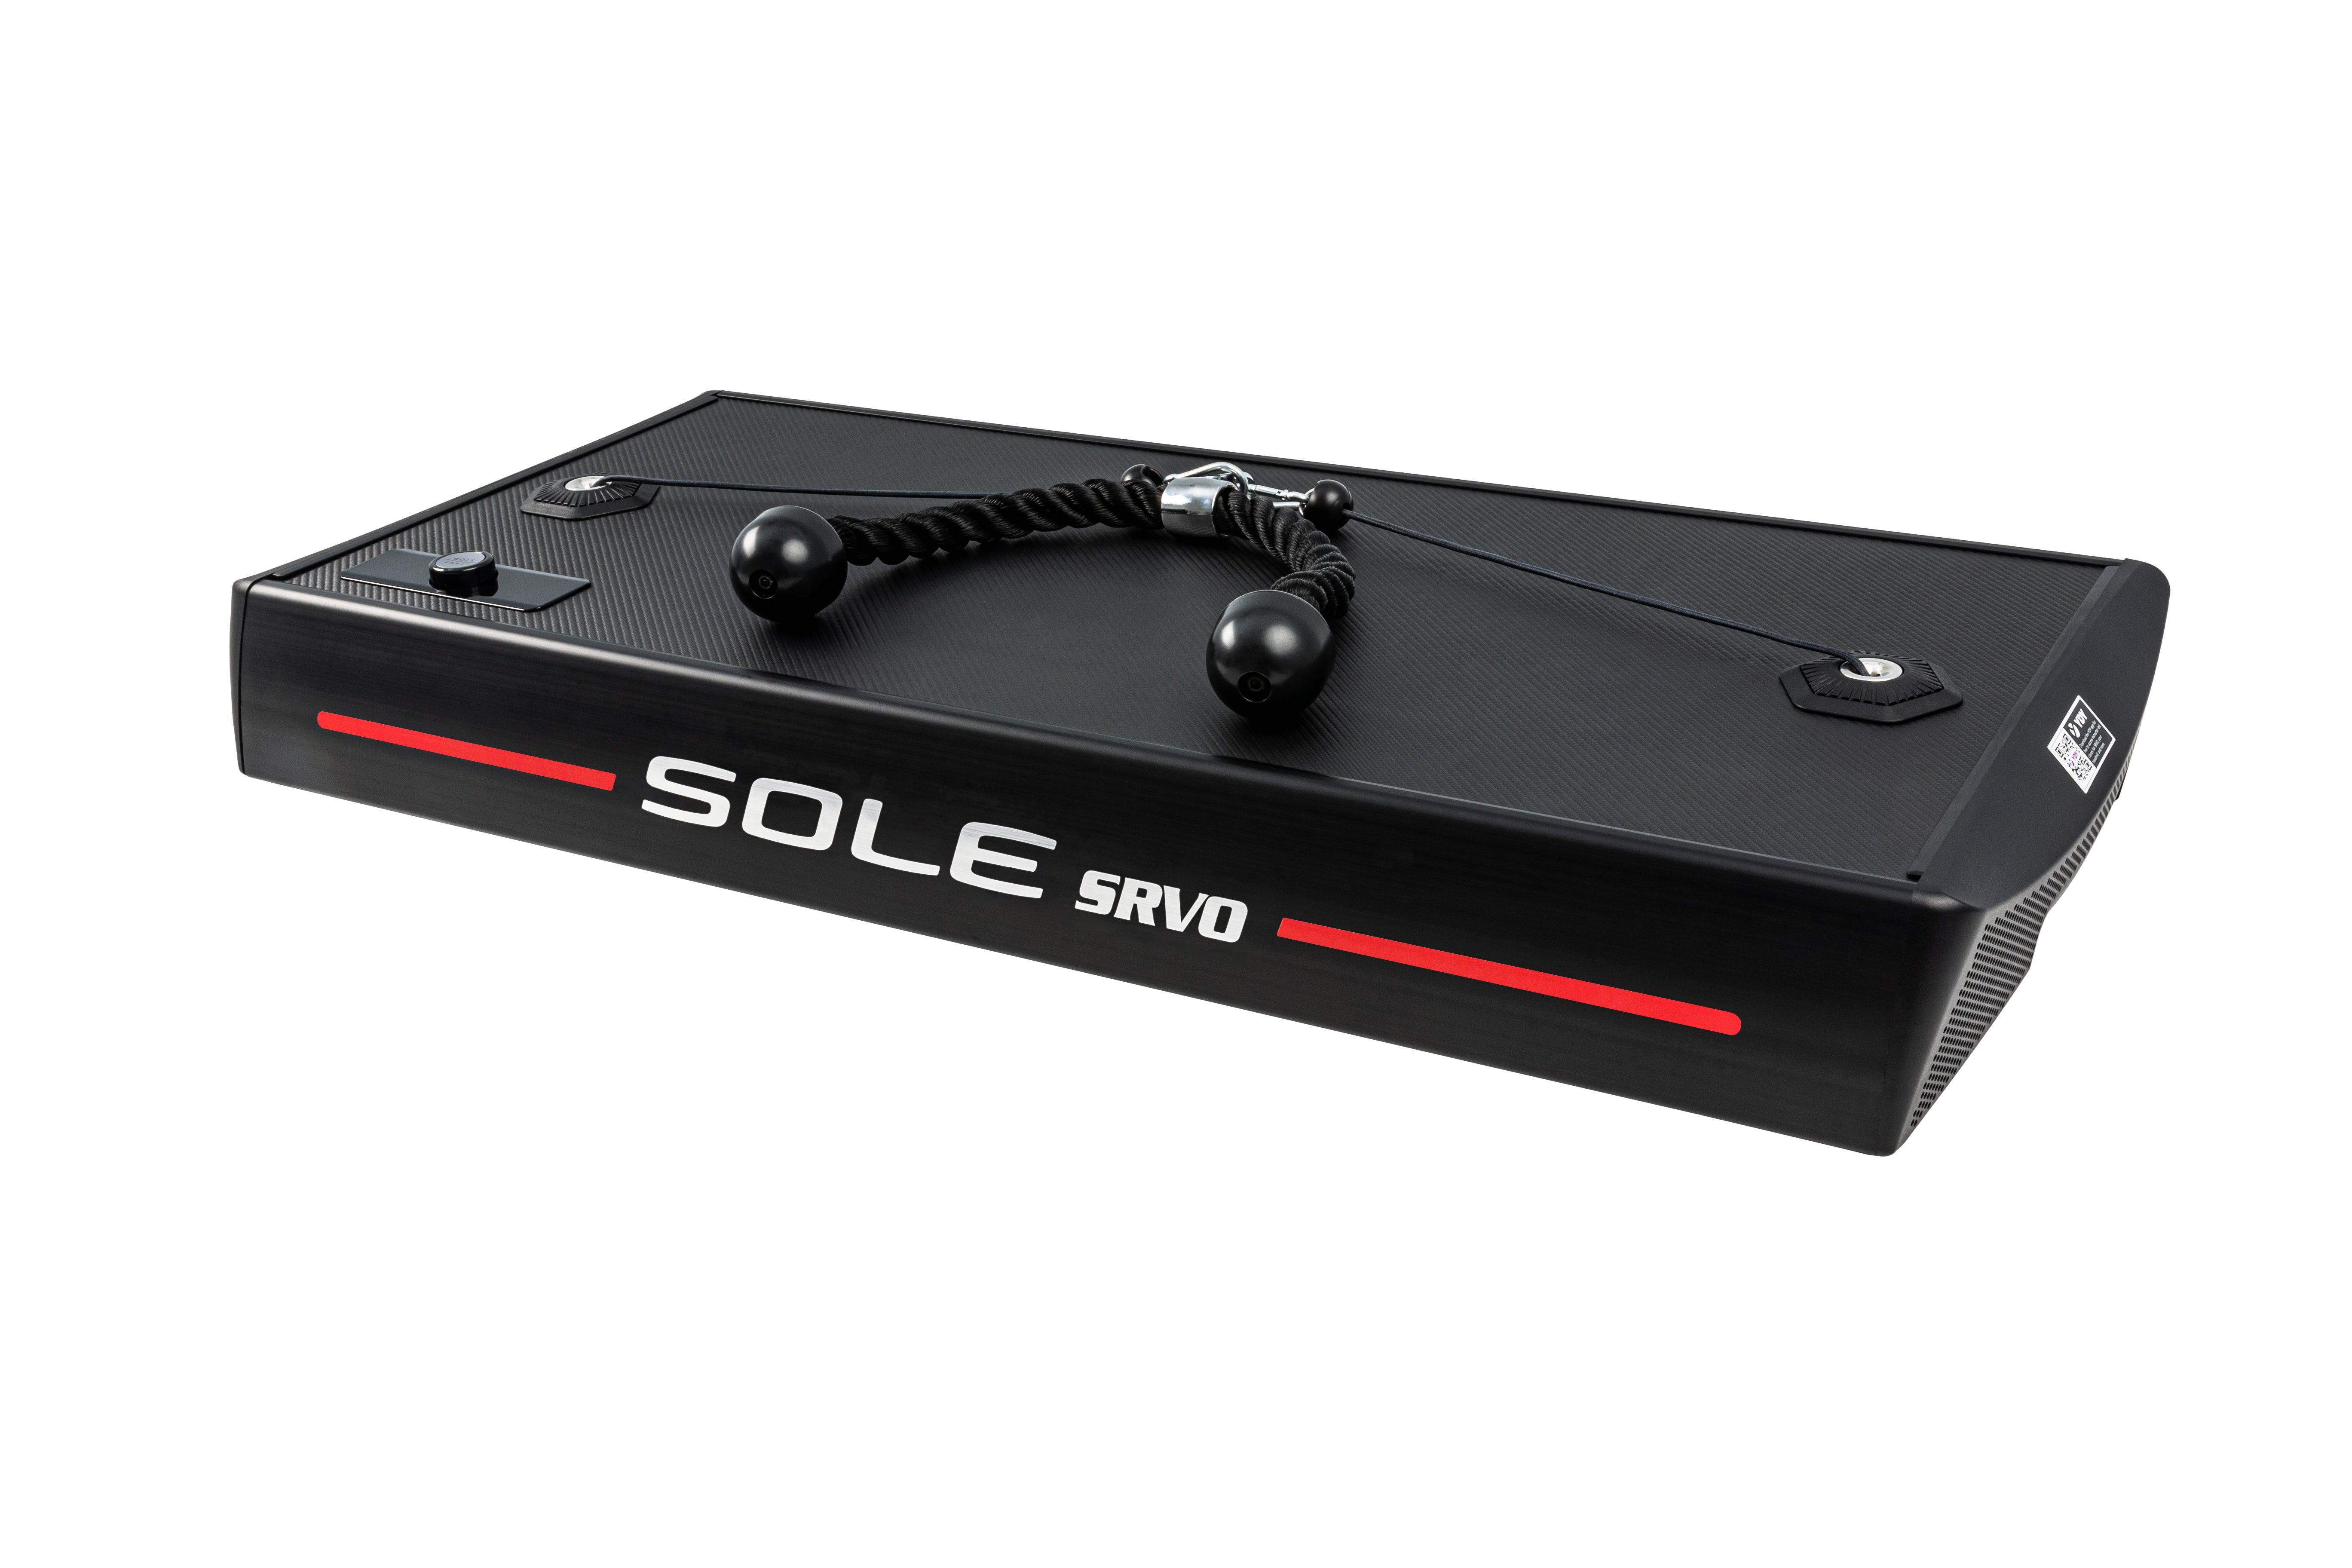 Side view of the Sole SRVO device displaying its black design, "SOLE SRVO" logo with a red stripe, and an extended retractable handle on top along with the rope attachment.